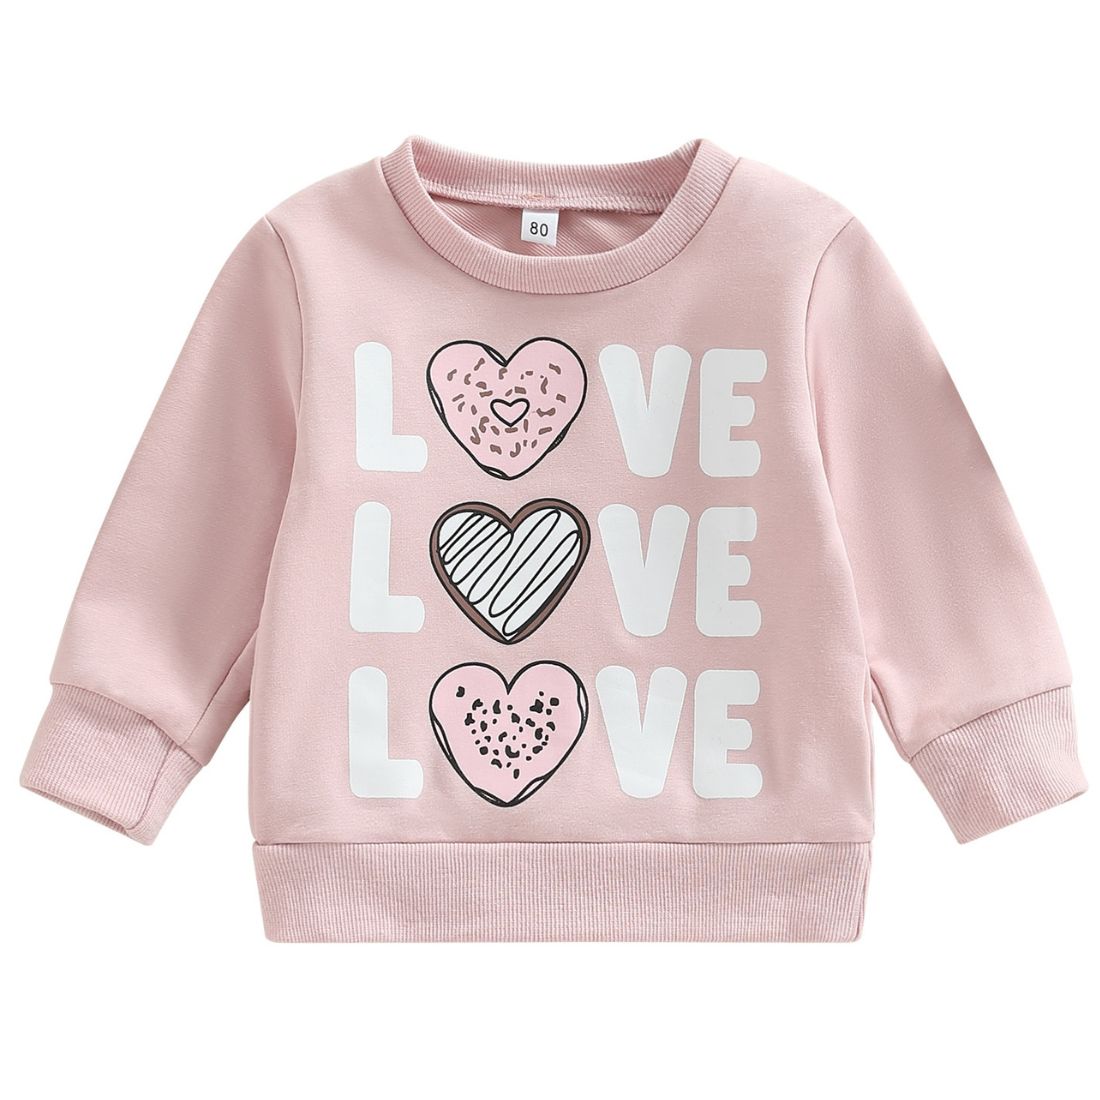 Little Girl Love Love Love Pink Sweatshirt - My Trendy Youngsters |  | Buy on-trend and stylish Baby and Toddler Winter Threads @ My Trendy Youngsters - Dress your little one in Style @ My Trendy Youngsters